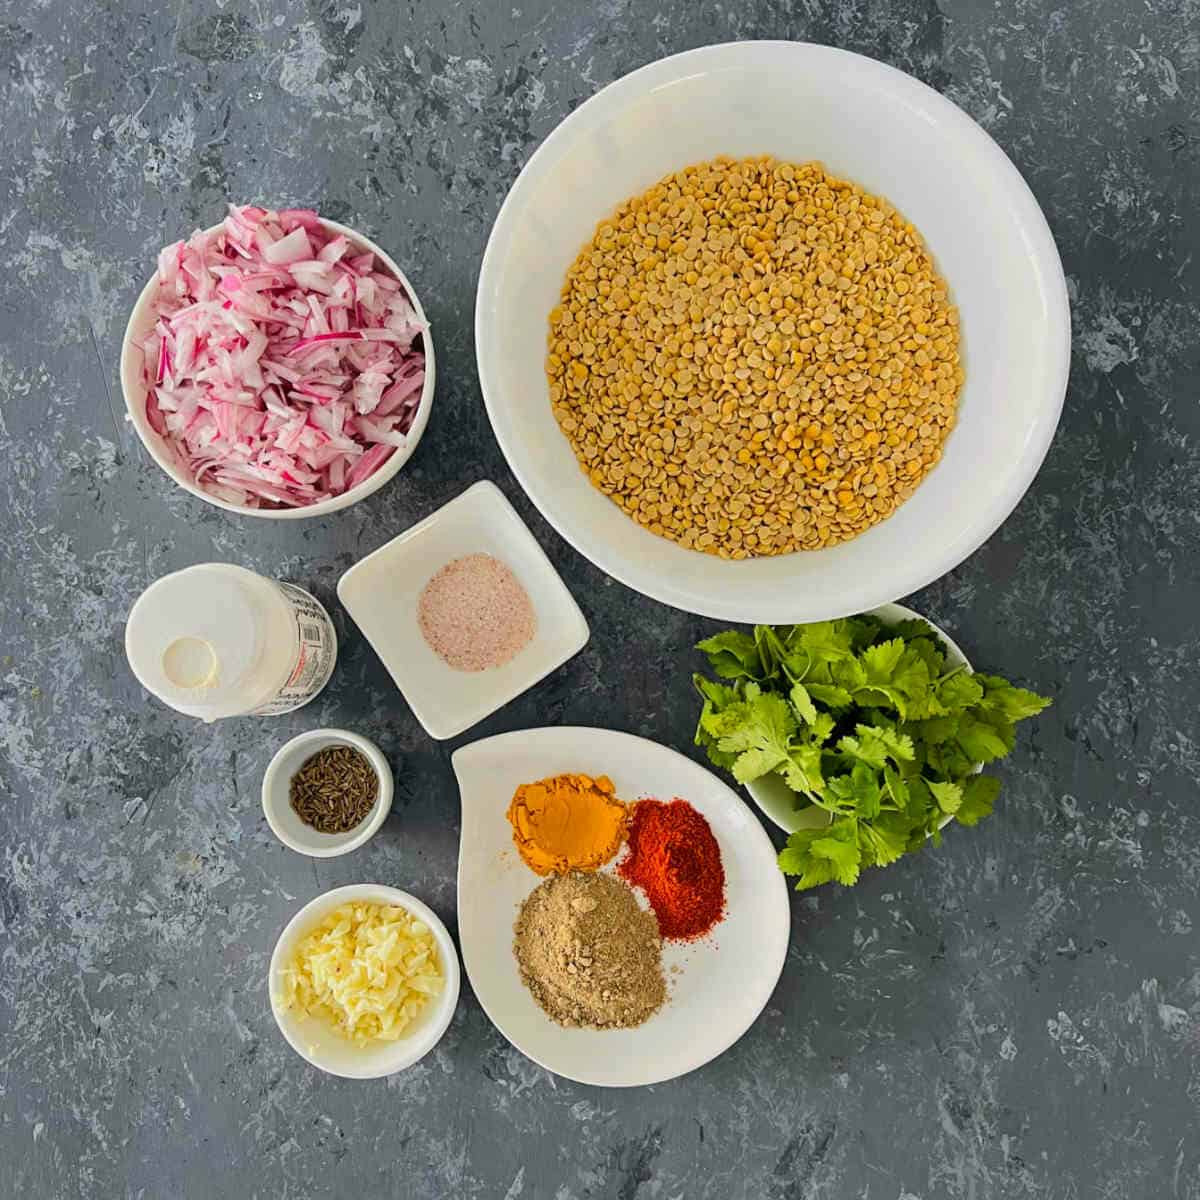 ingredients to make dal fry in an instant pot